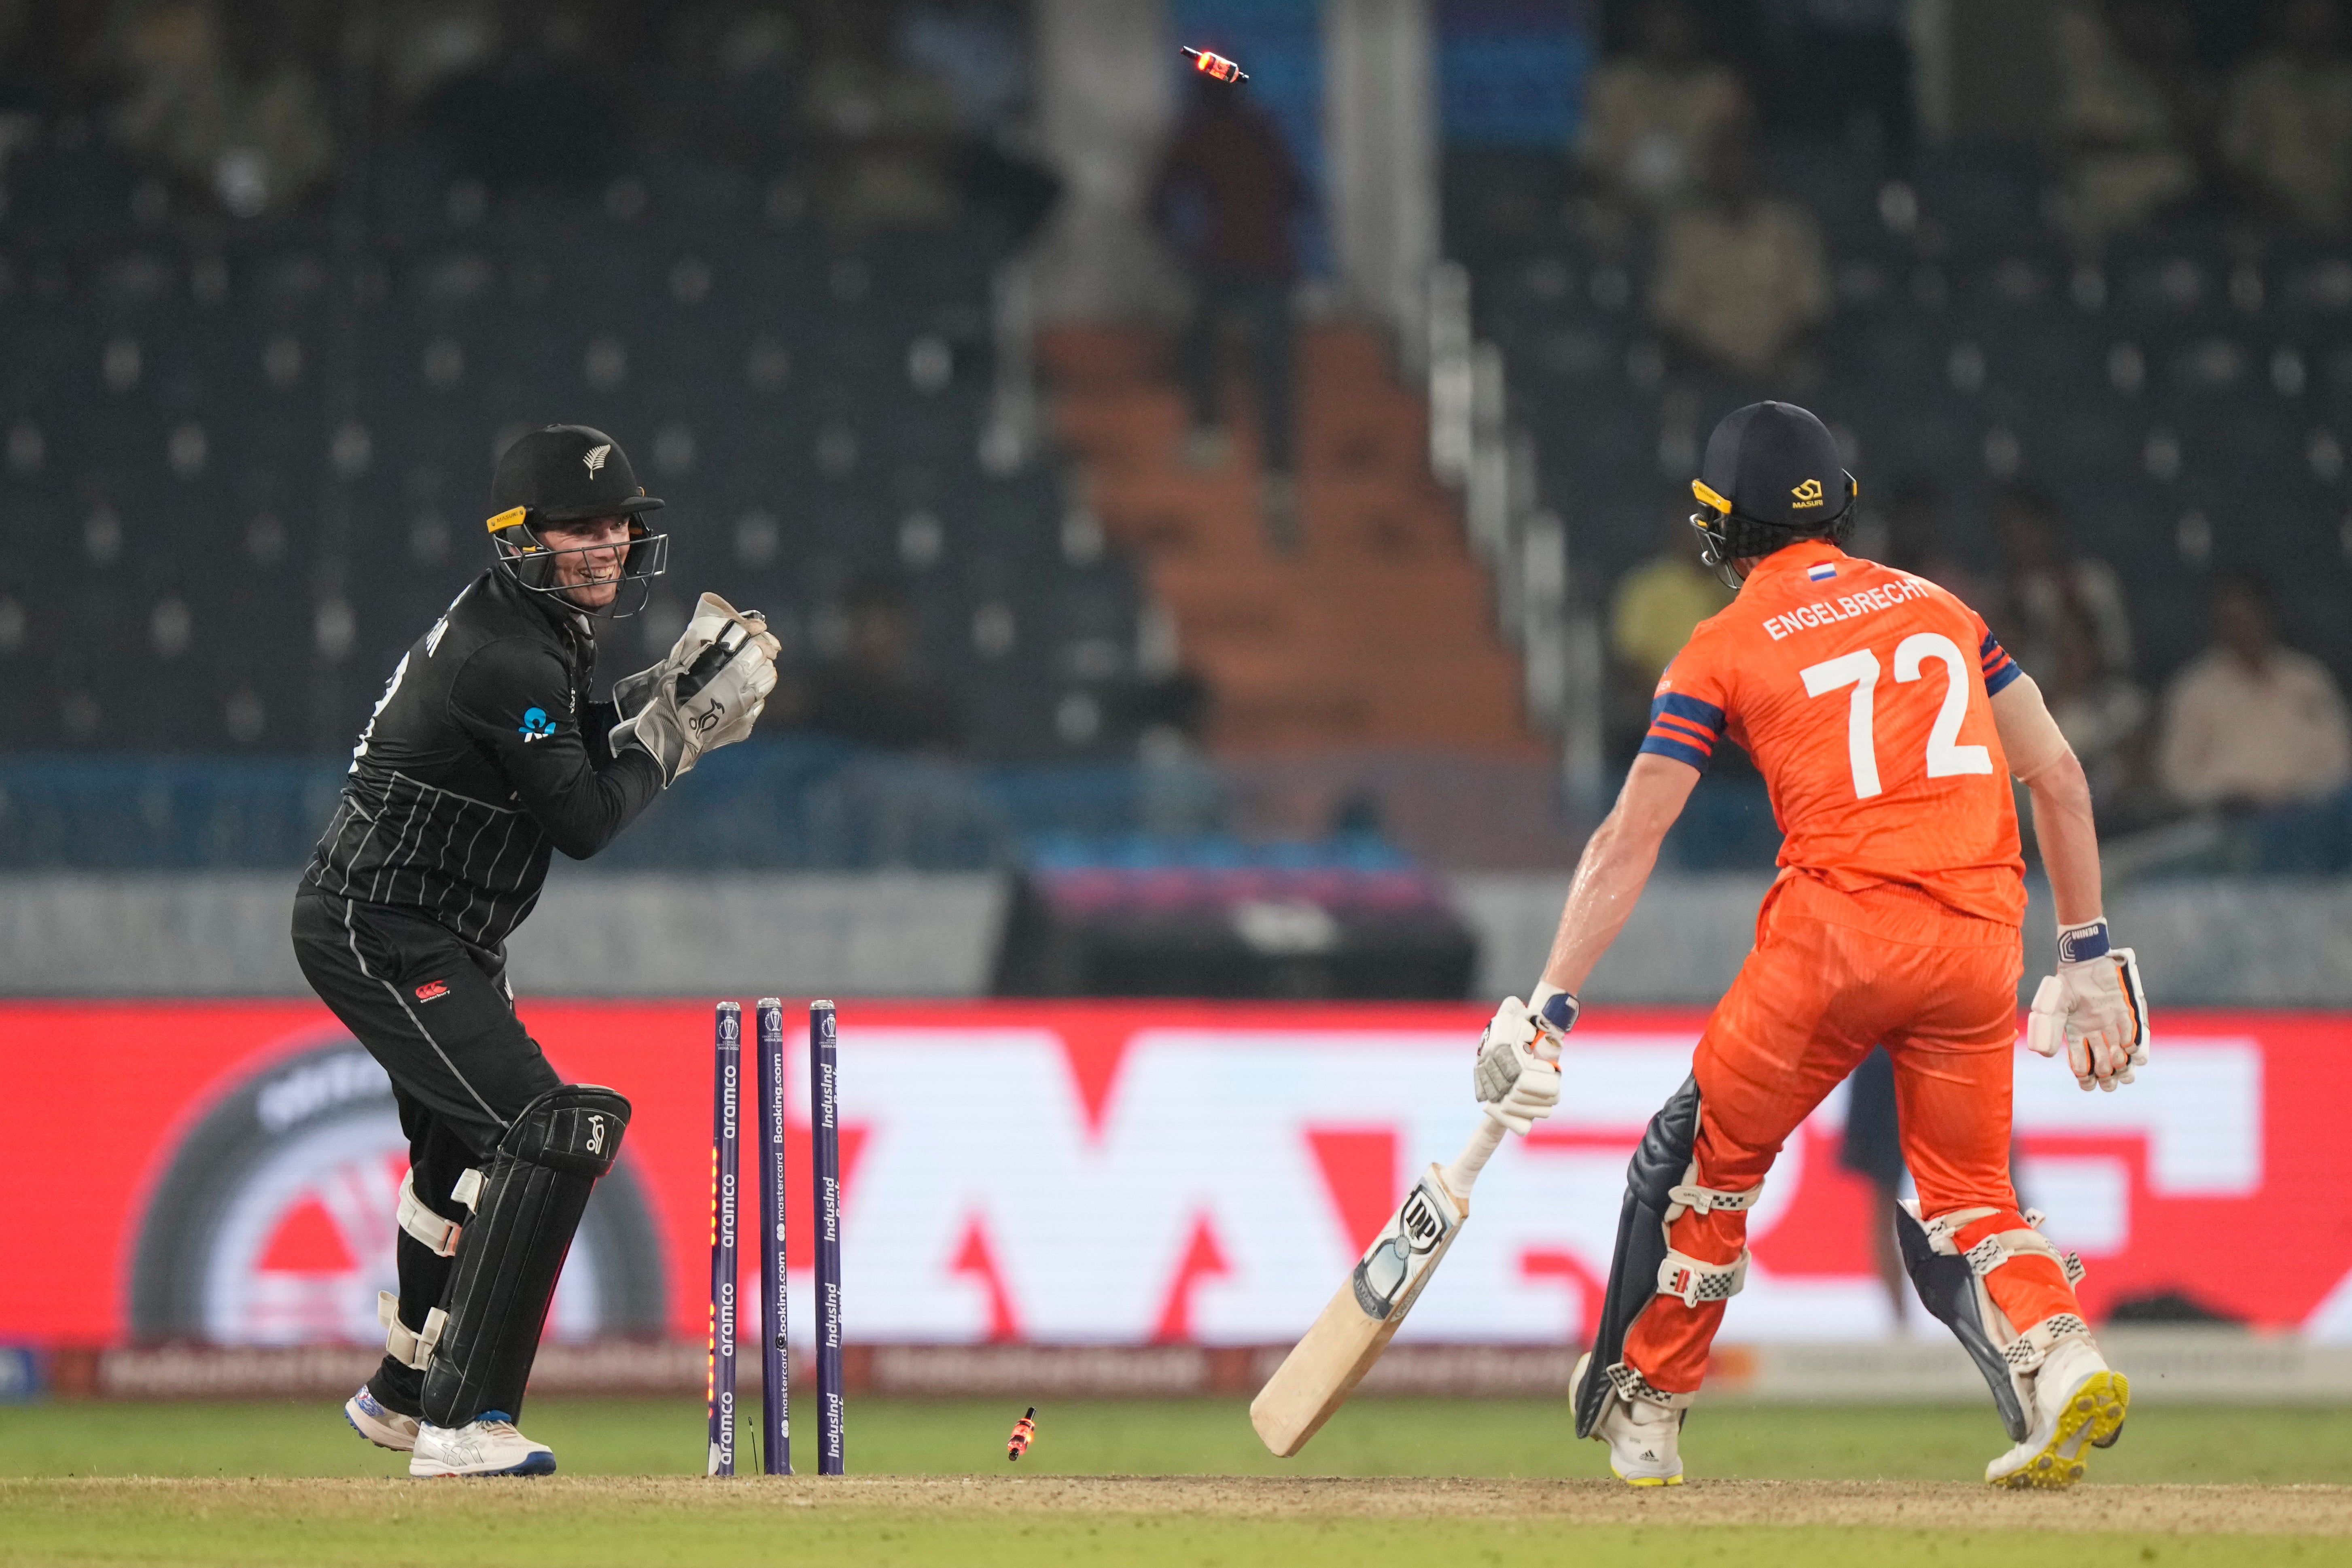 New Zealand’s wicketkeeper Tom Latham dislodges the bails to stump out Netherlands’ Sybrand Engelbrecht, which was deemed not out by the third umpire, during the ICC Men’s Cricket World Cup match between New Zealand and Netherlands in Hyderabad